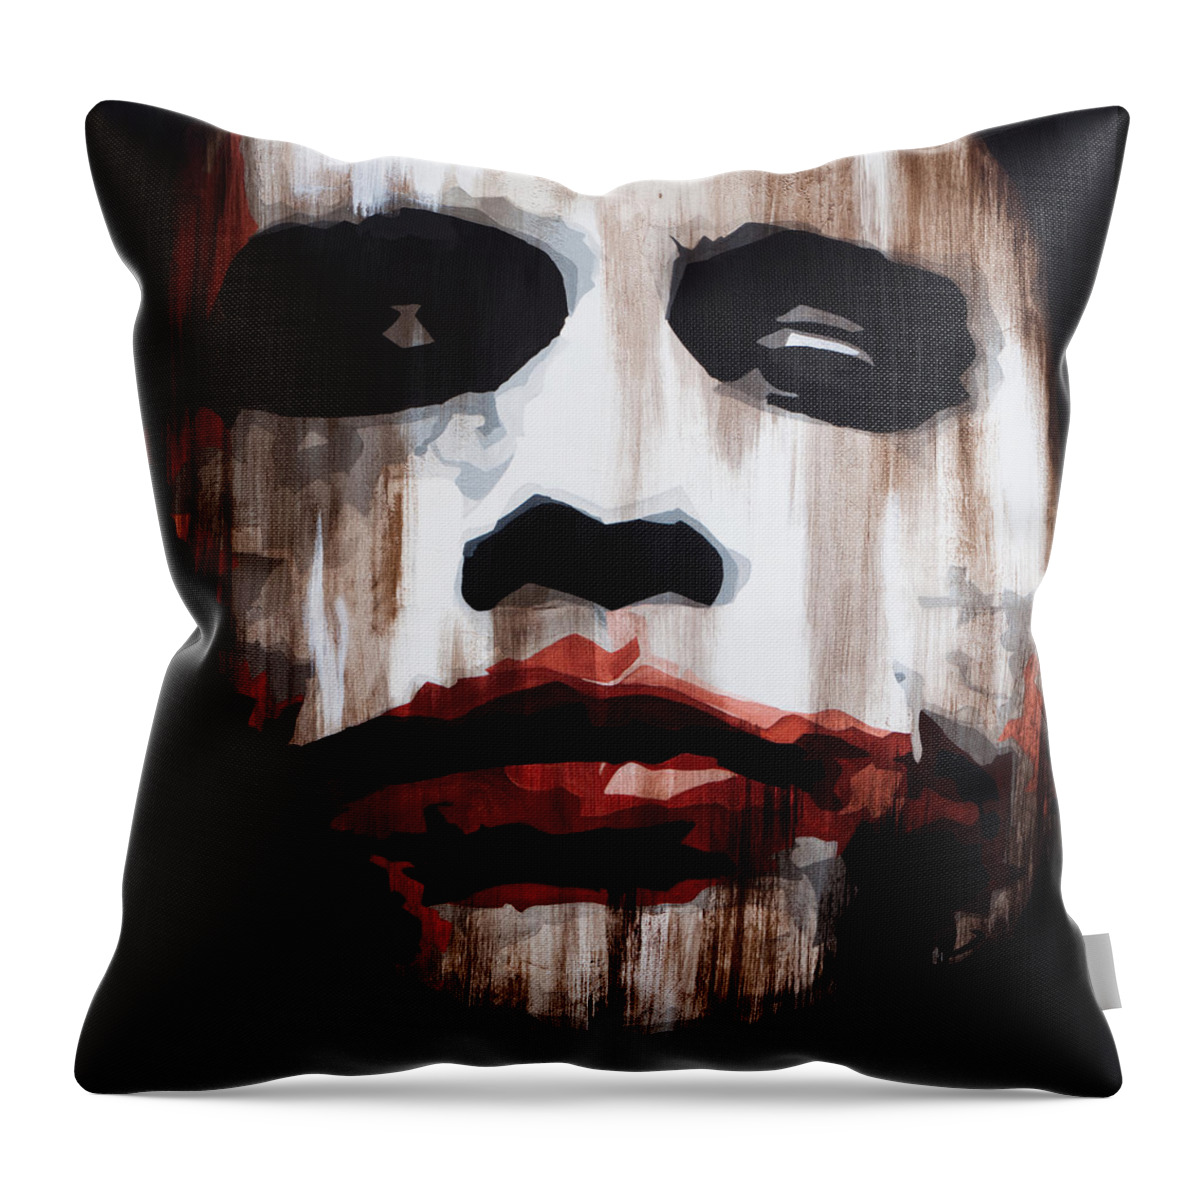 The Joker Throw Pillow featuring the painting Heath Ledger Why So Serious by Brad Jensen